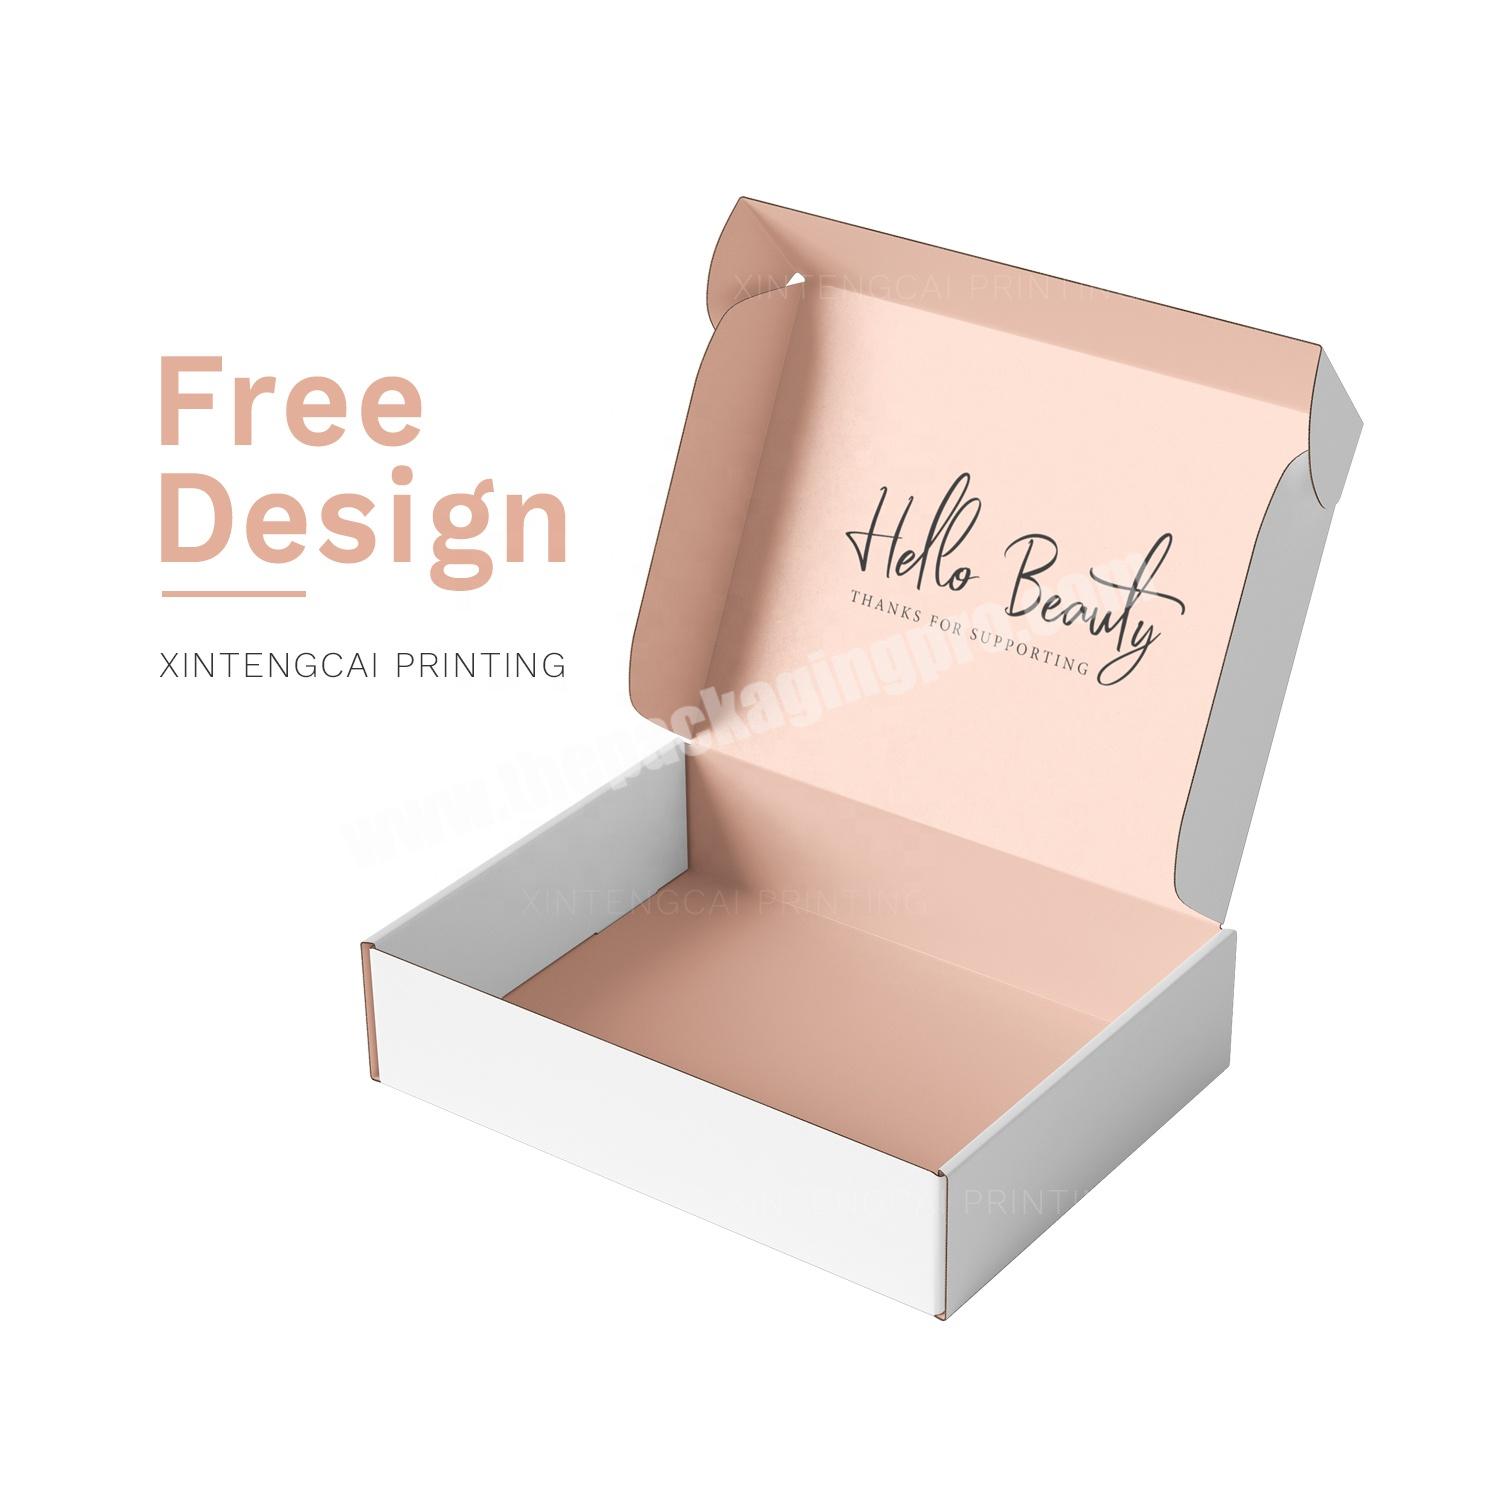 Free Design Peach Color Corrugated Paper Makeup Packaging Box for BB Creams  Liquid Lipstick  False Lashes  Nails  Brushes